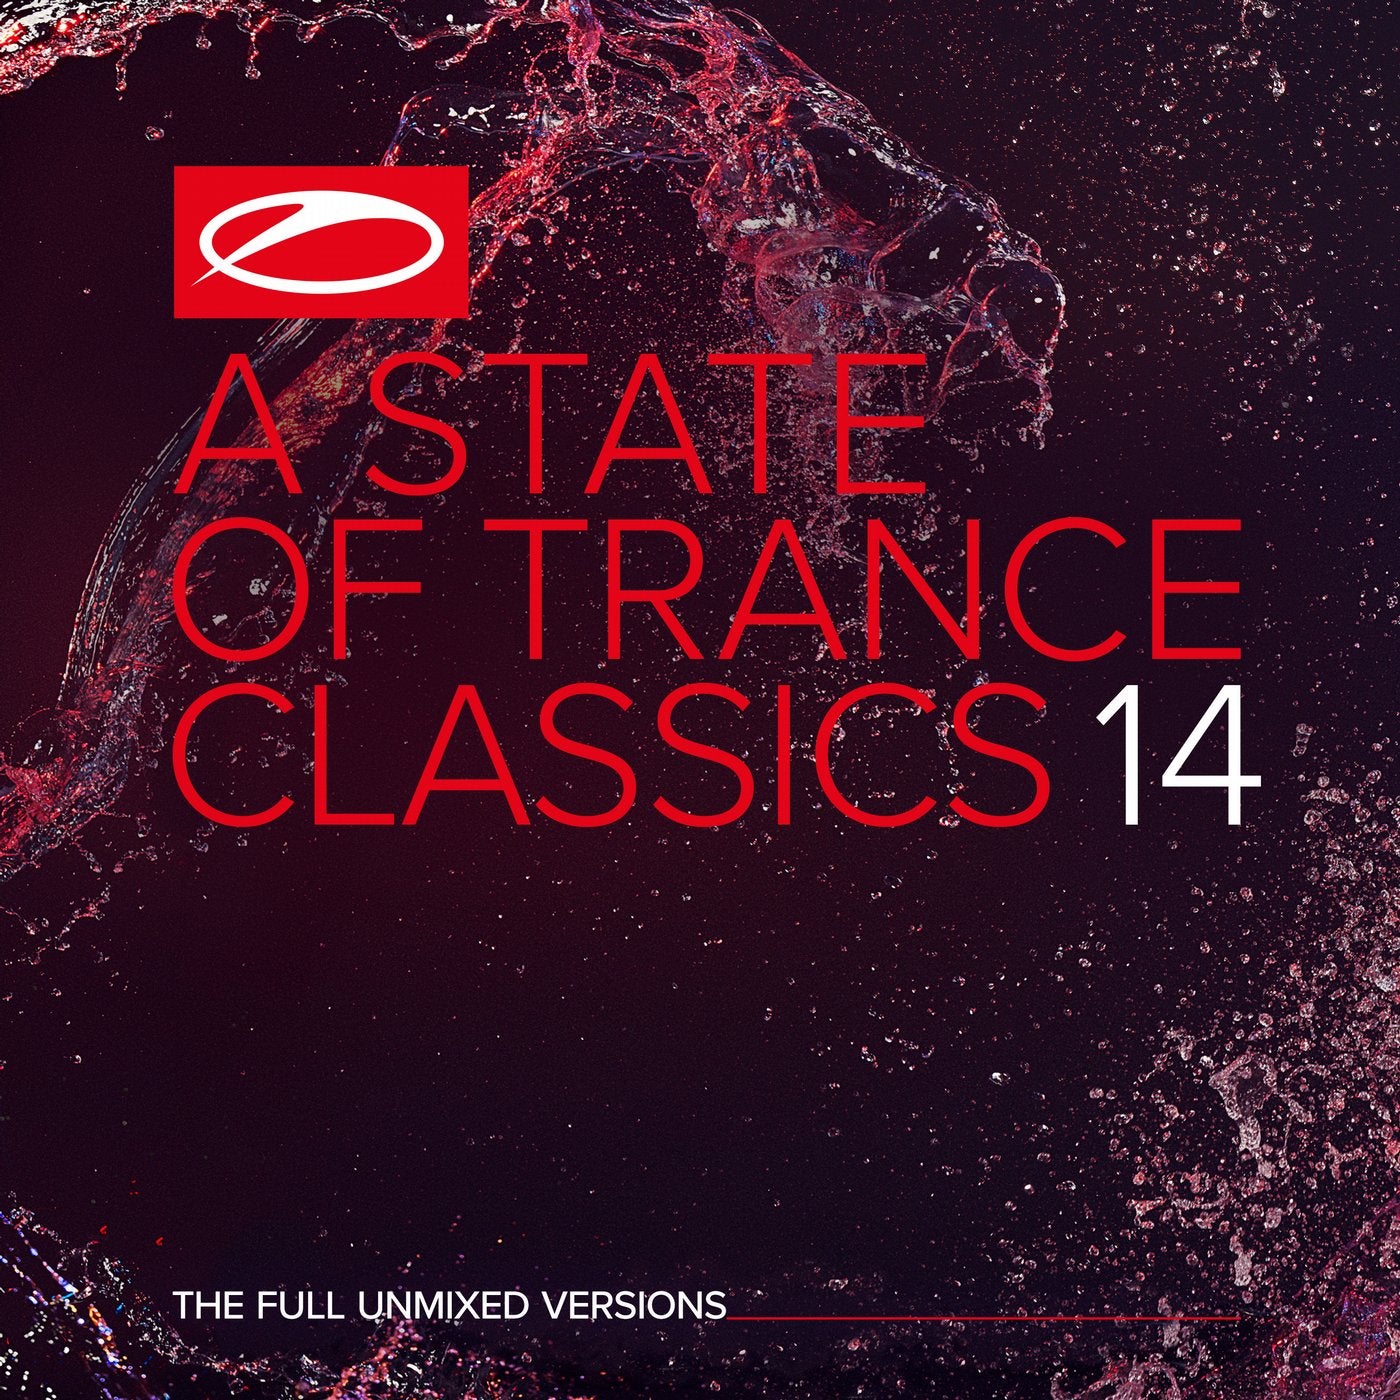 A State Of Trance Classics, Vol. 14 - The Full Unmixed Versions